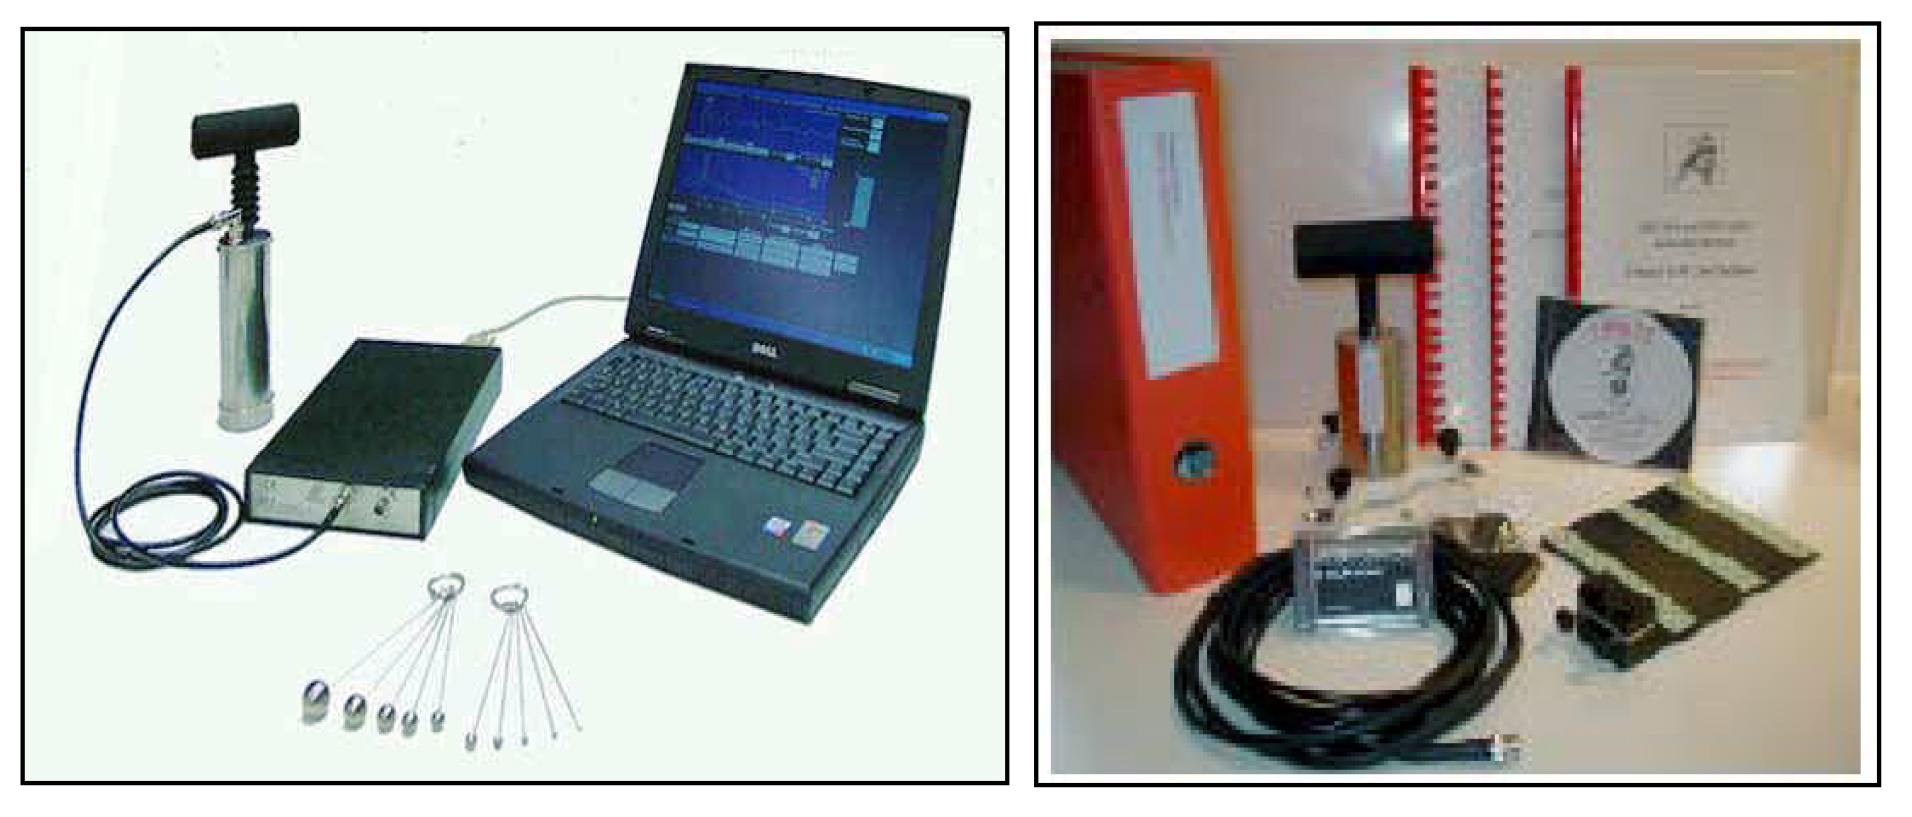 Example Impact Echo Systems:  (a) Impact Echo Instruments, LLC, and (b) Germann  Instruments A/S.